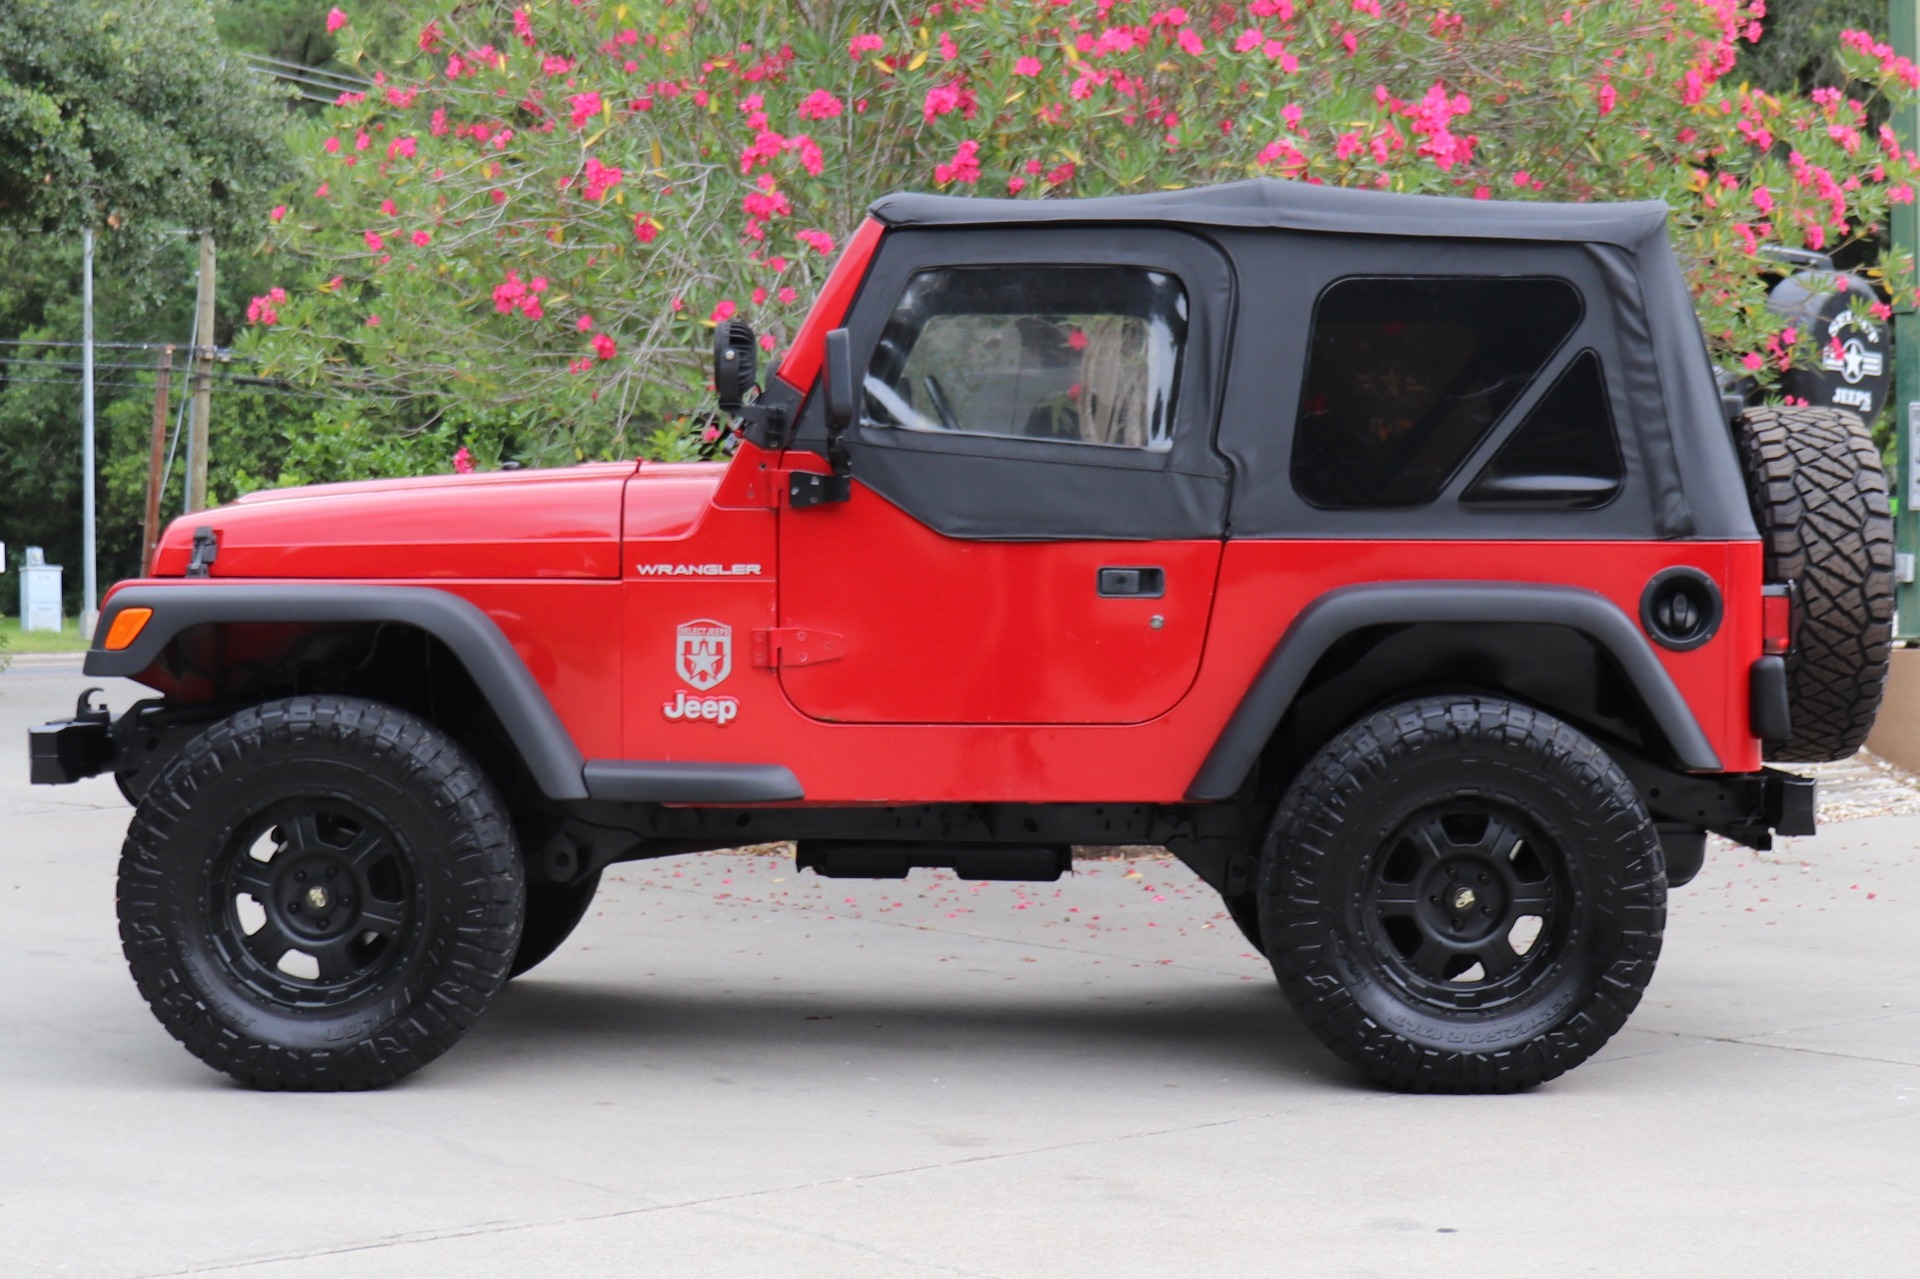 Used 2001 Jeep Wrangler SE For Sale ($10,995) | Select Jeeps Inc. Stock  #375914